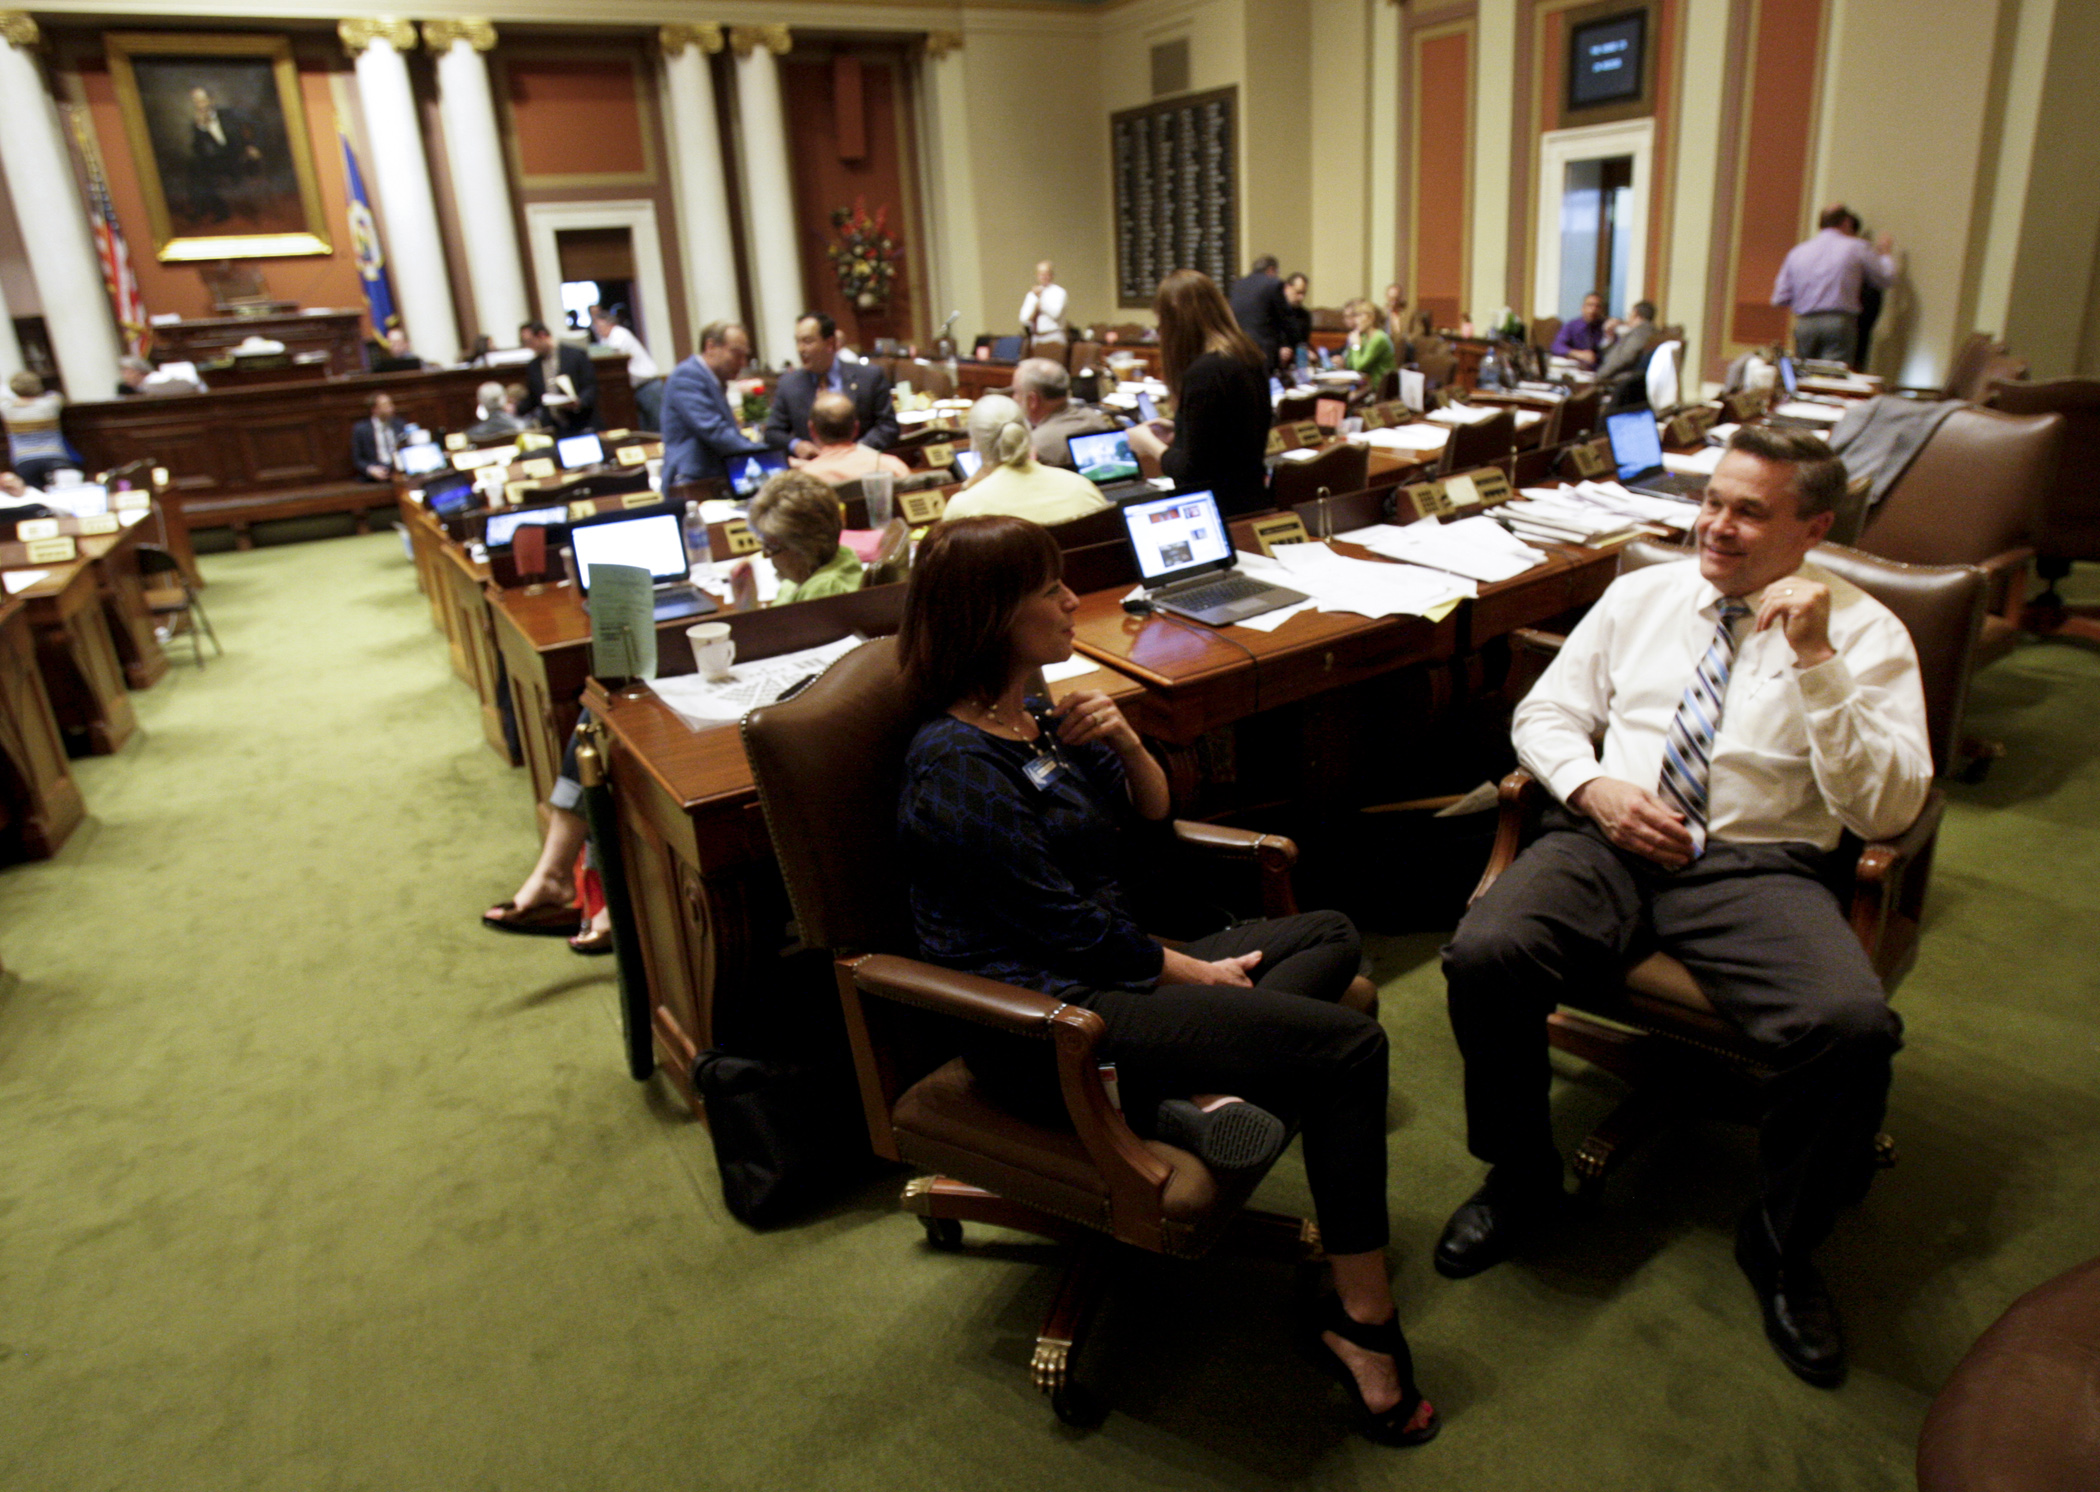 Rep. Glenn Gruenhagen and House page, Barbara Smith, chat during an early evening House recess May 17. Earlier the House had voted to be allowed to meet past midnight. Photo by Paul Battaglia